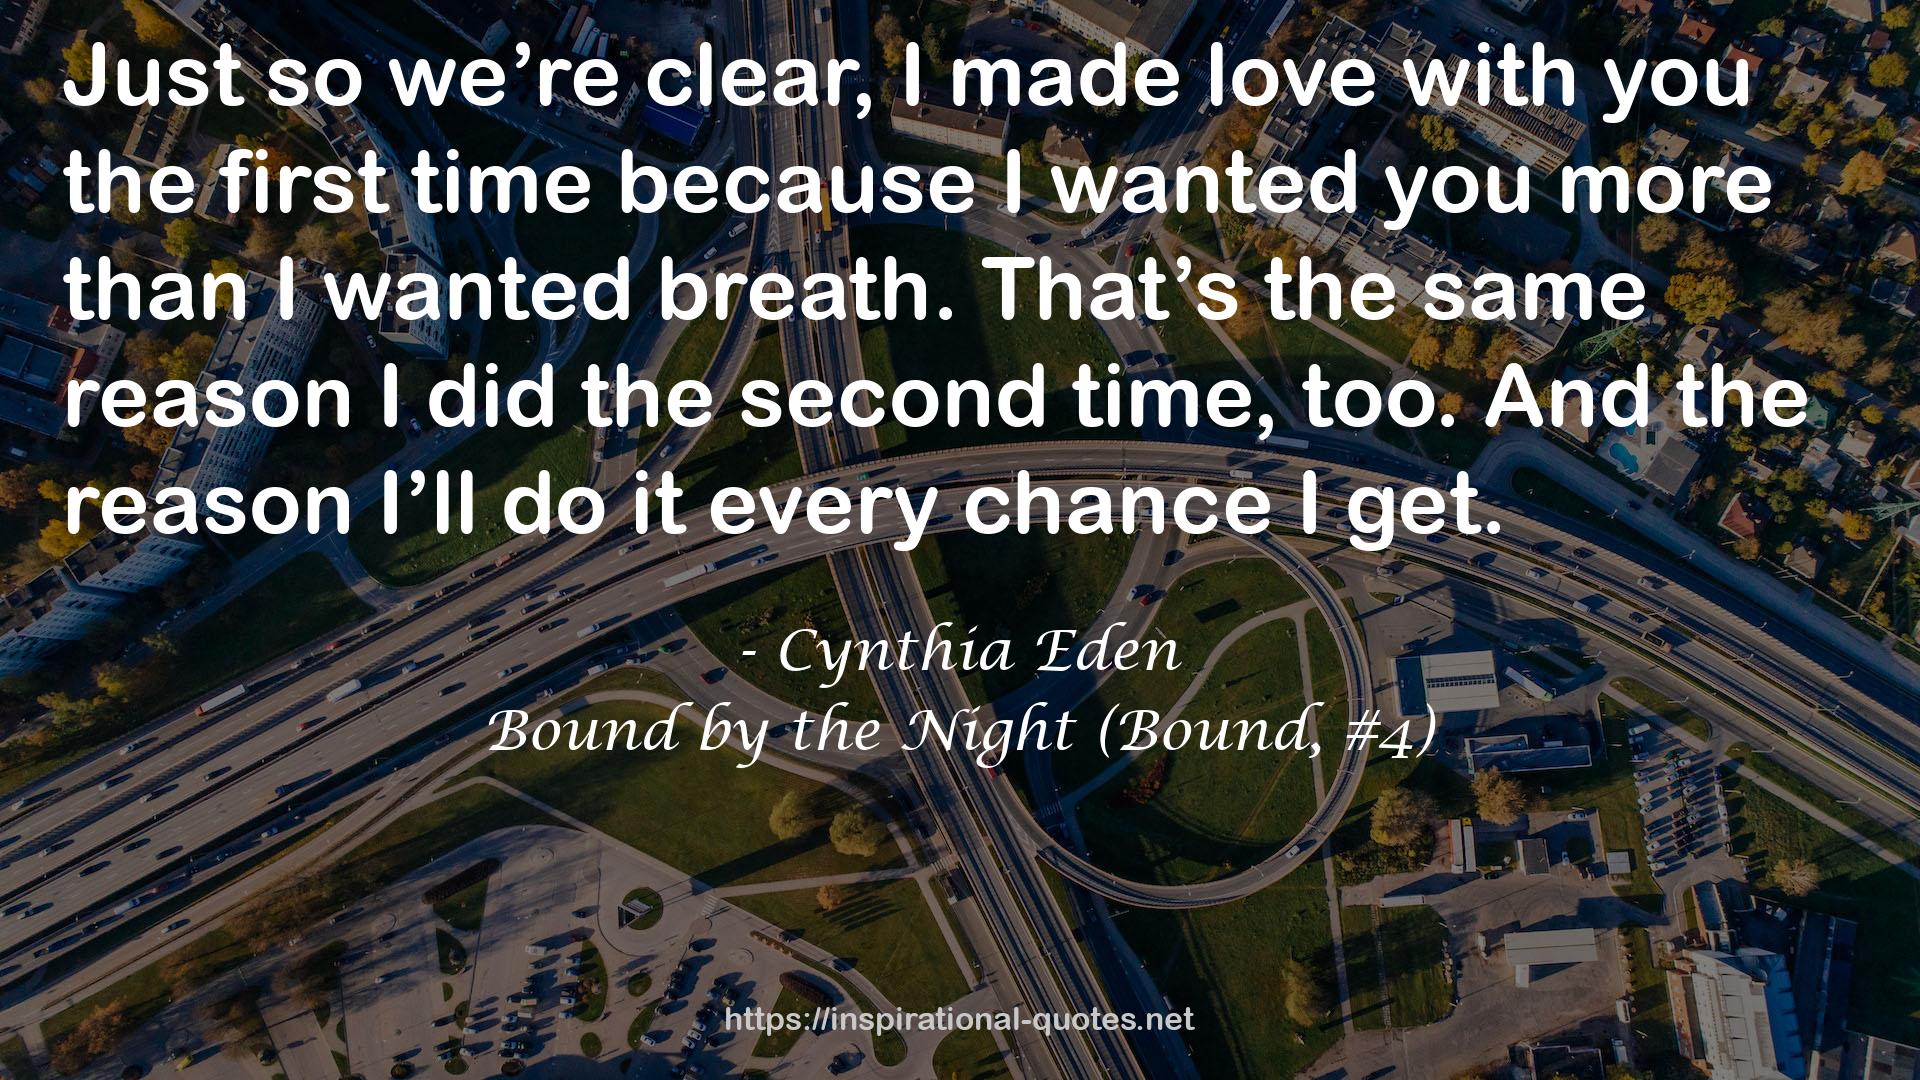 Bound by the Night (Bound, #4) QUOTES